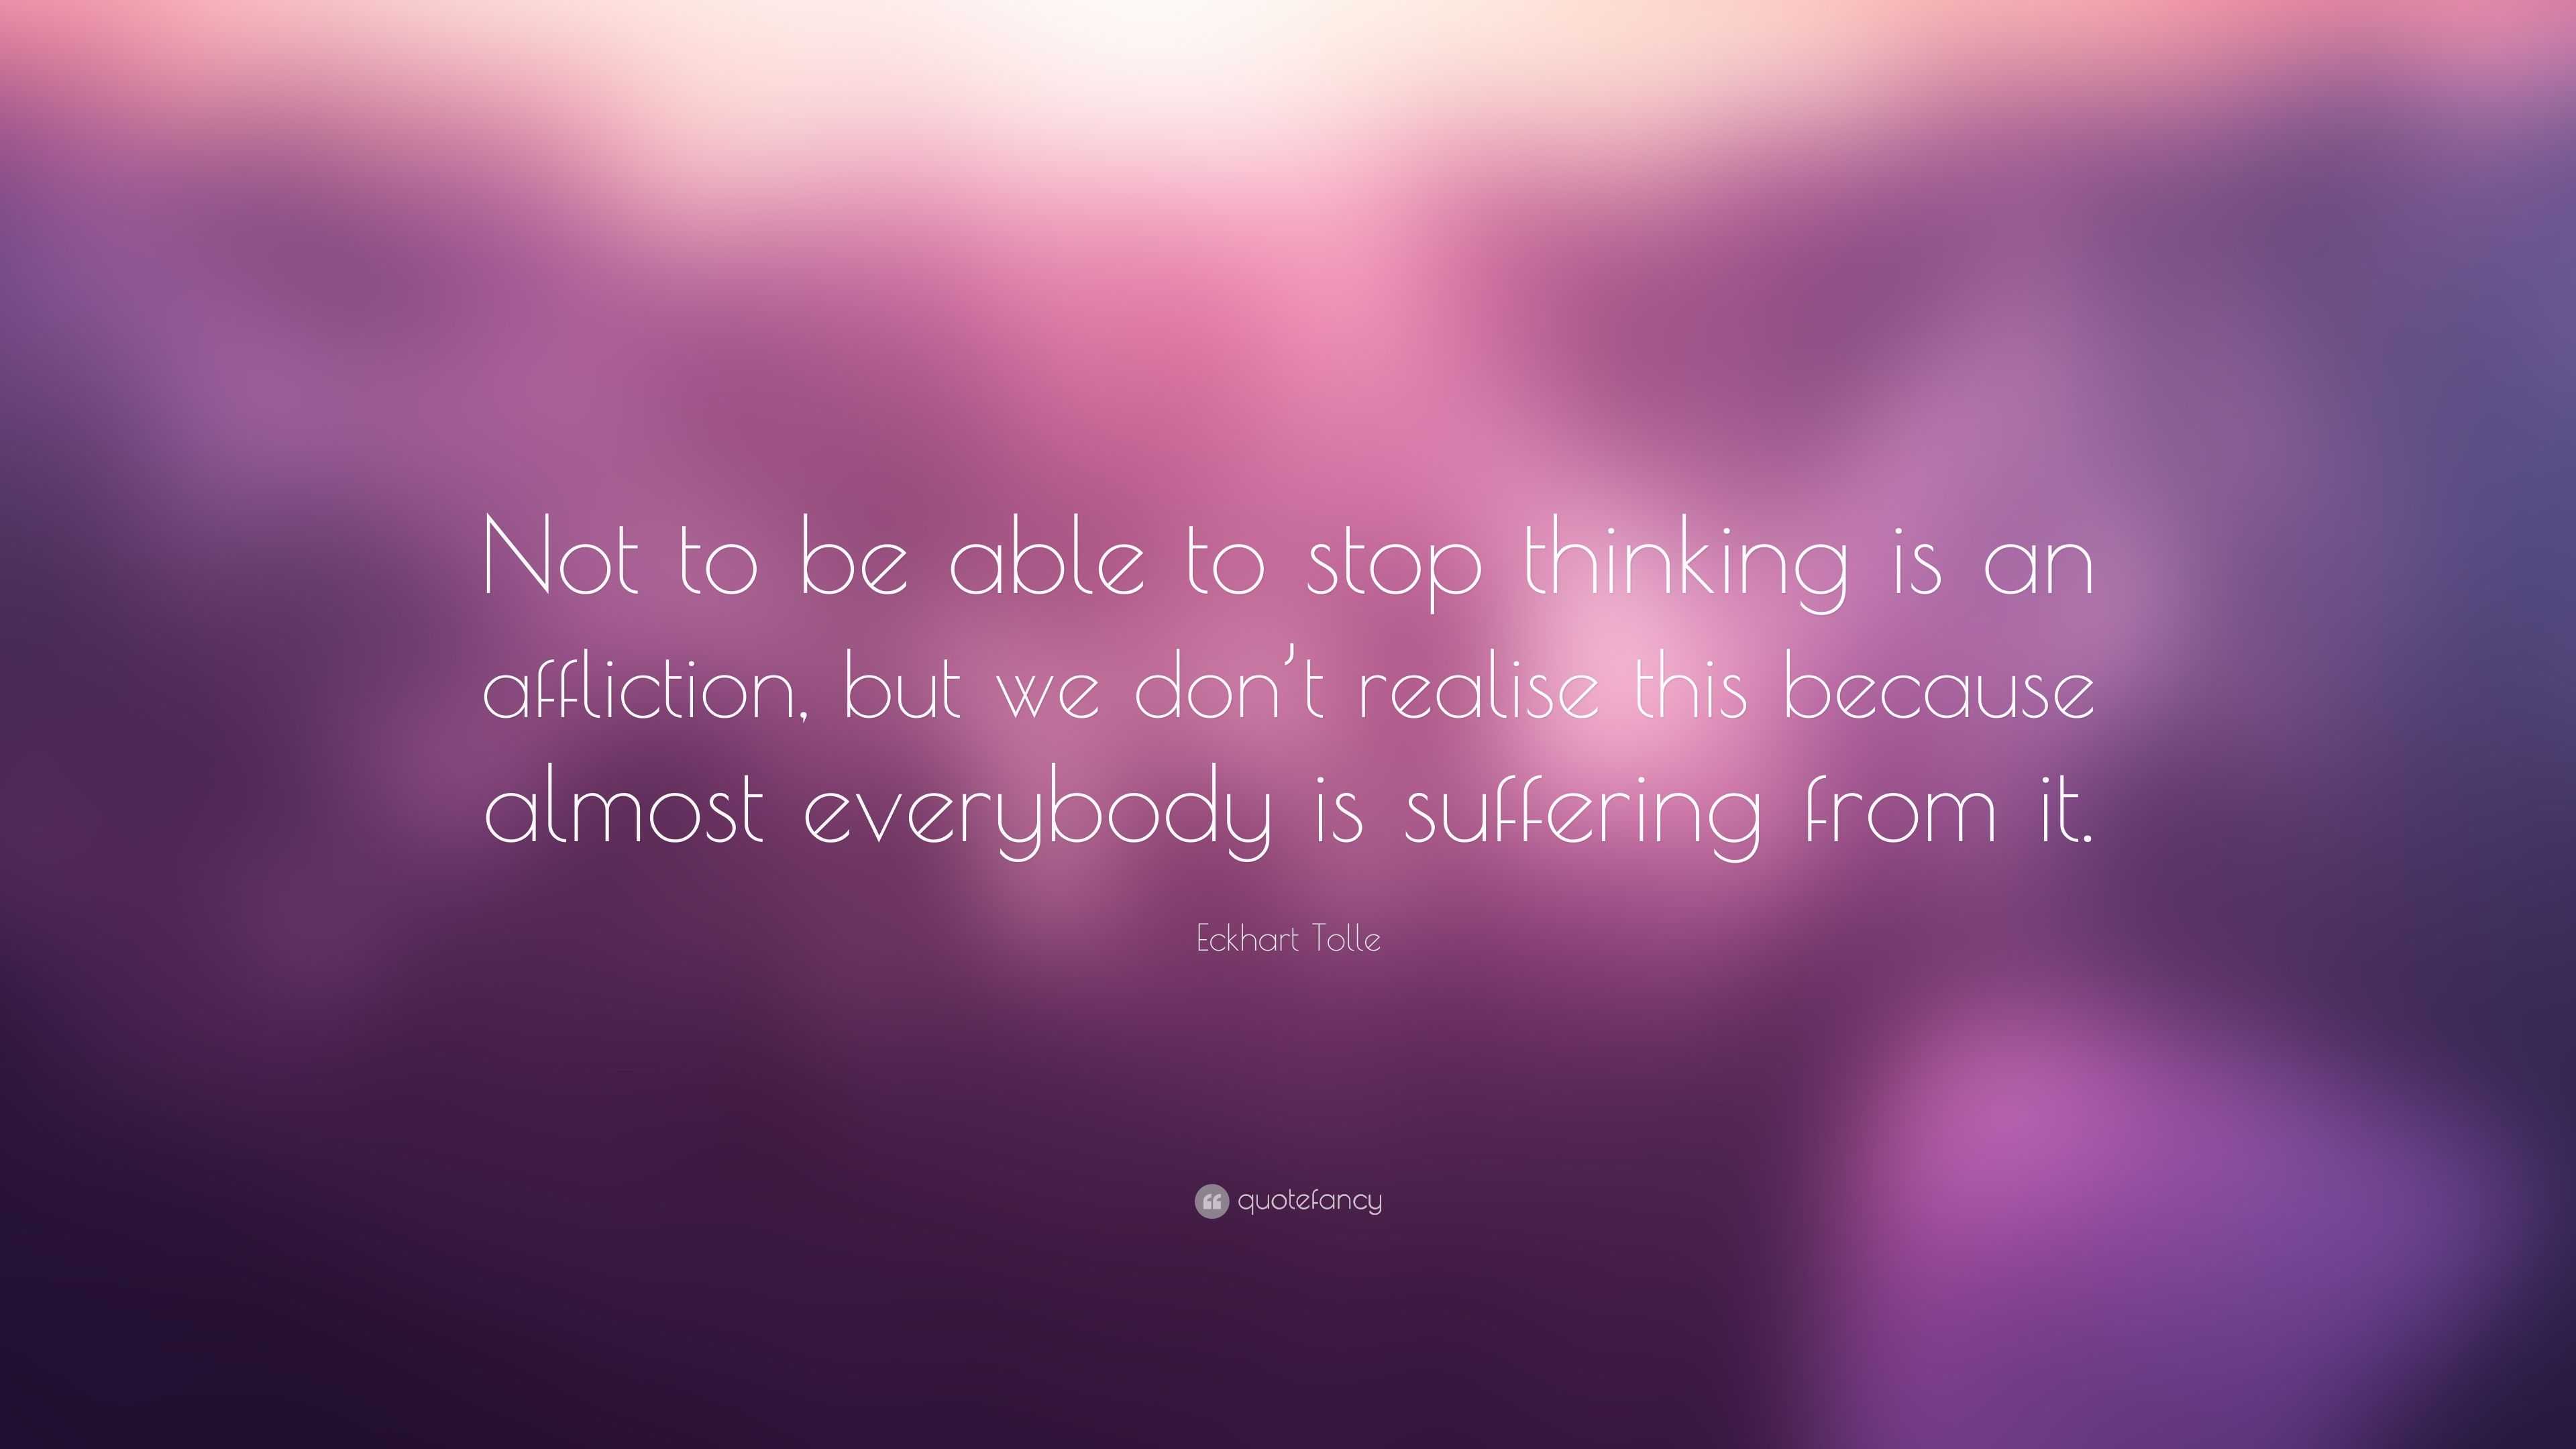 Eckhart Tolle Quote: “Not to be able to stop thinking is an affliction ...